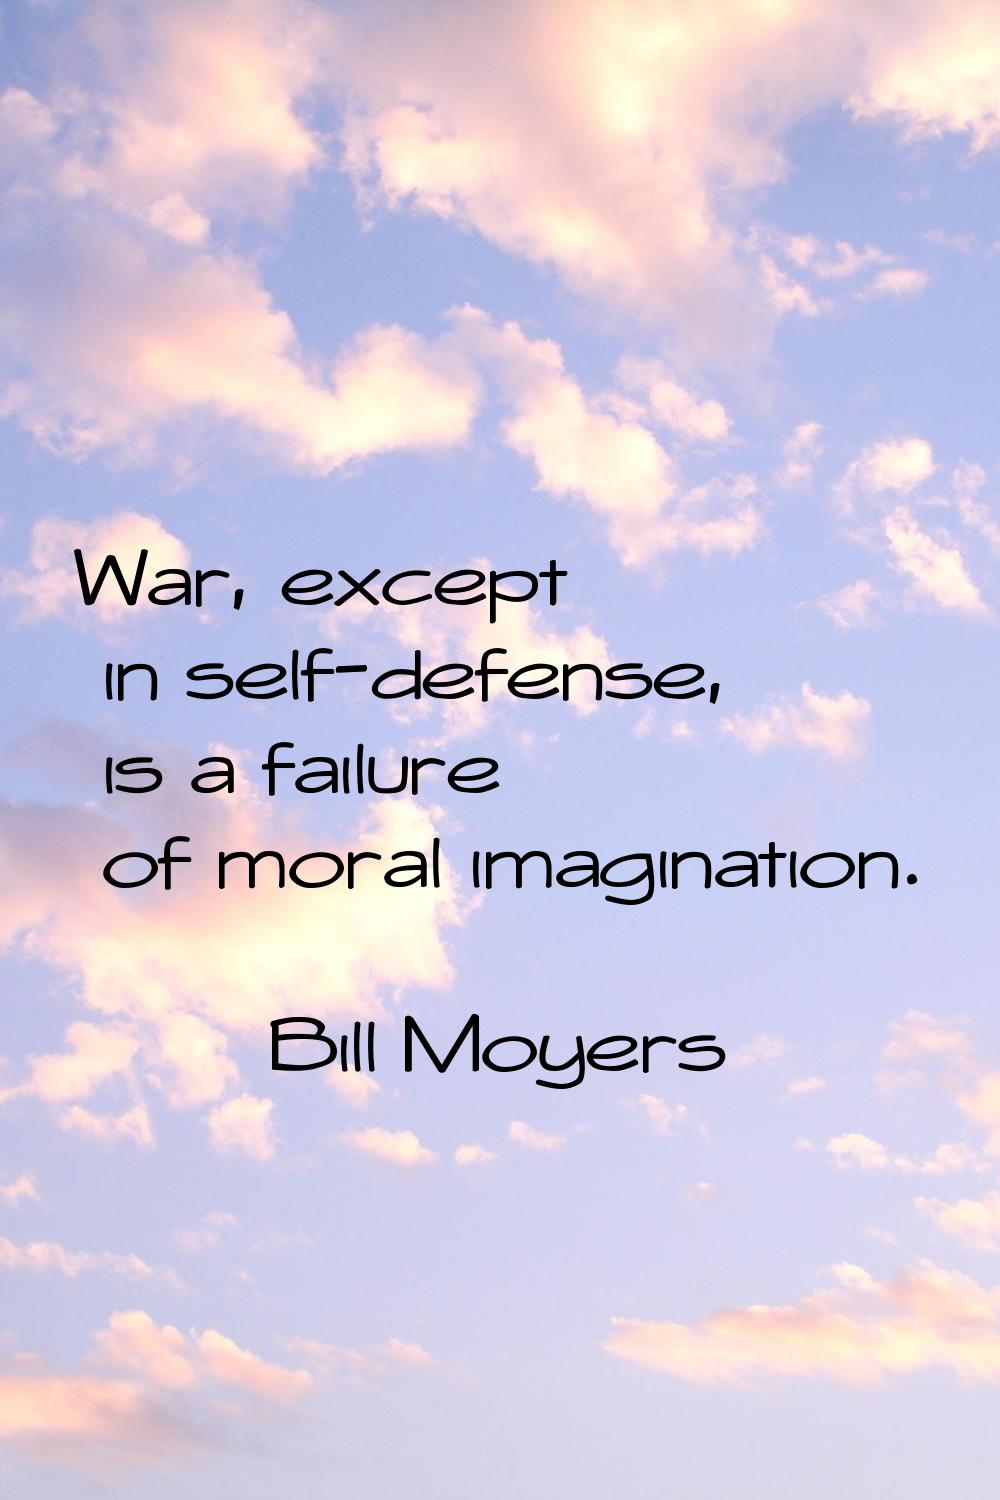 War, except in self-defense, is a failure of moral imagination.